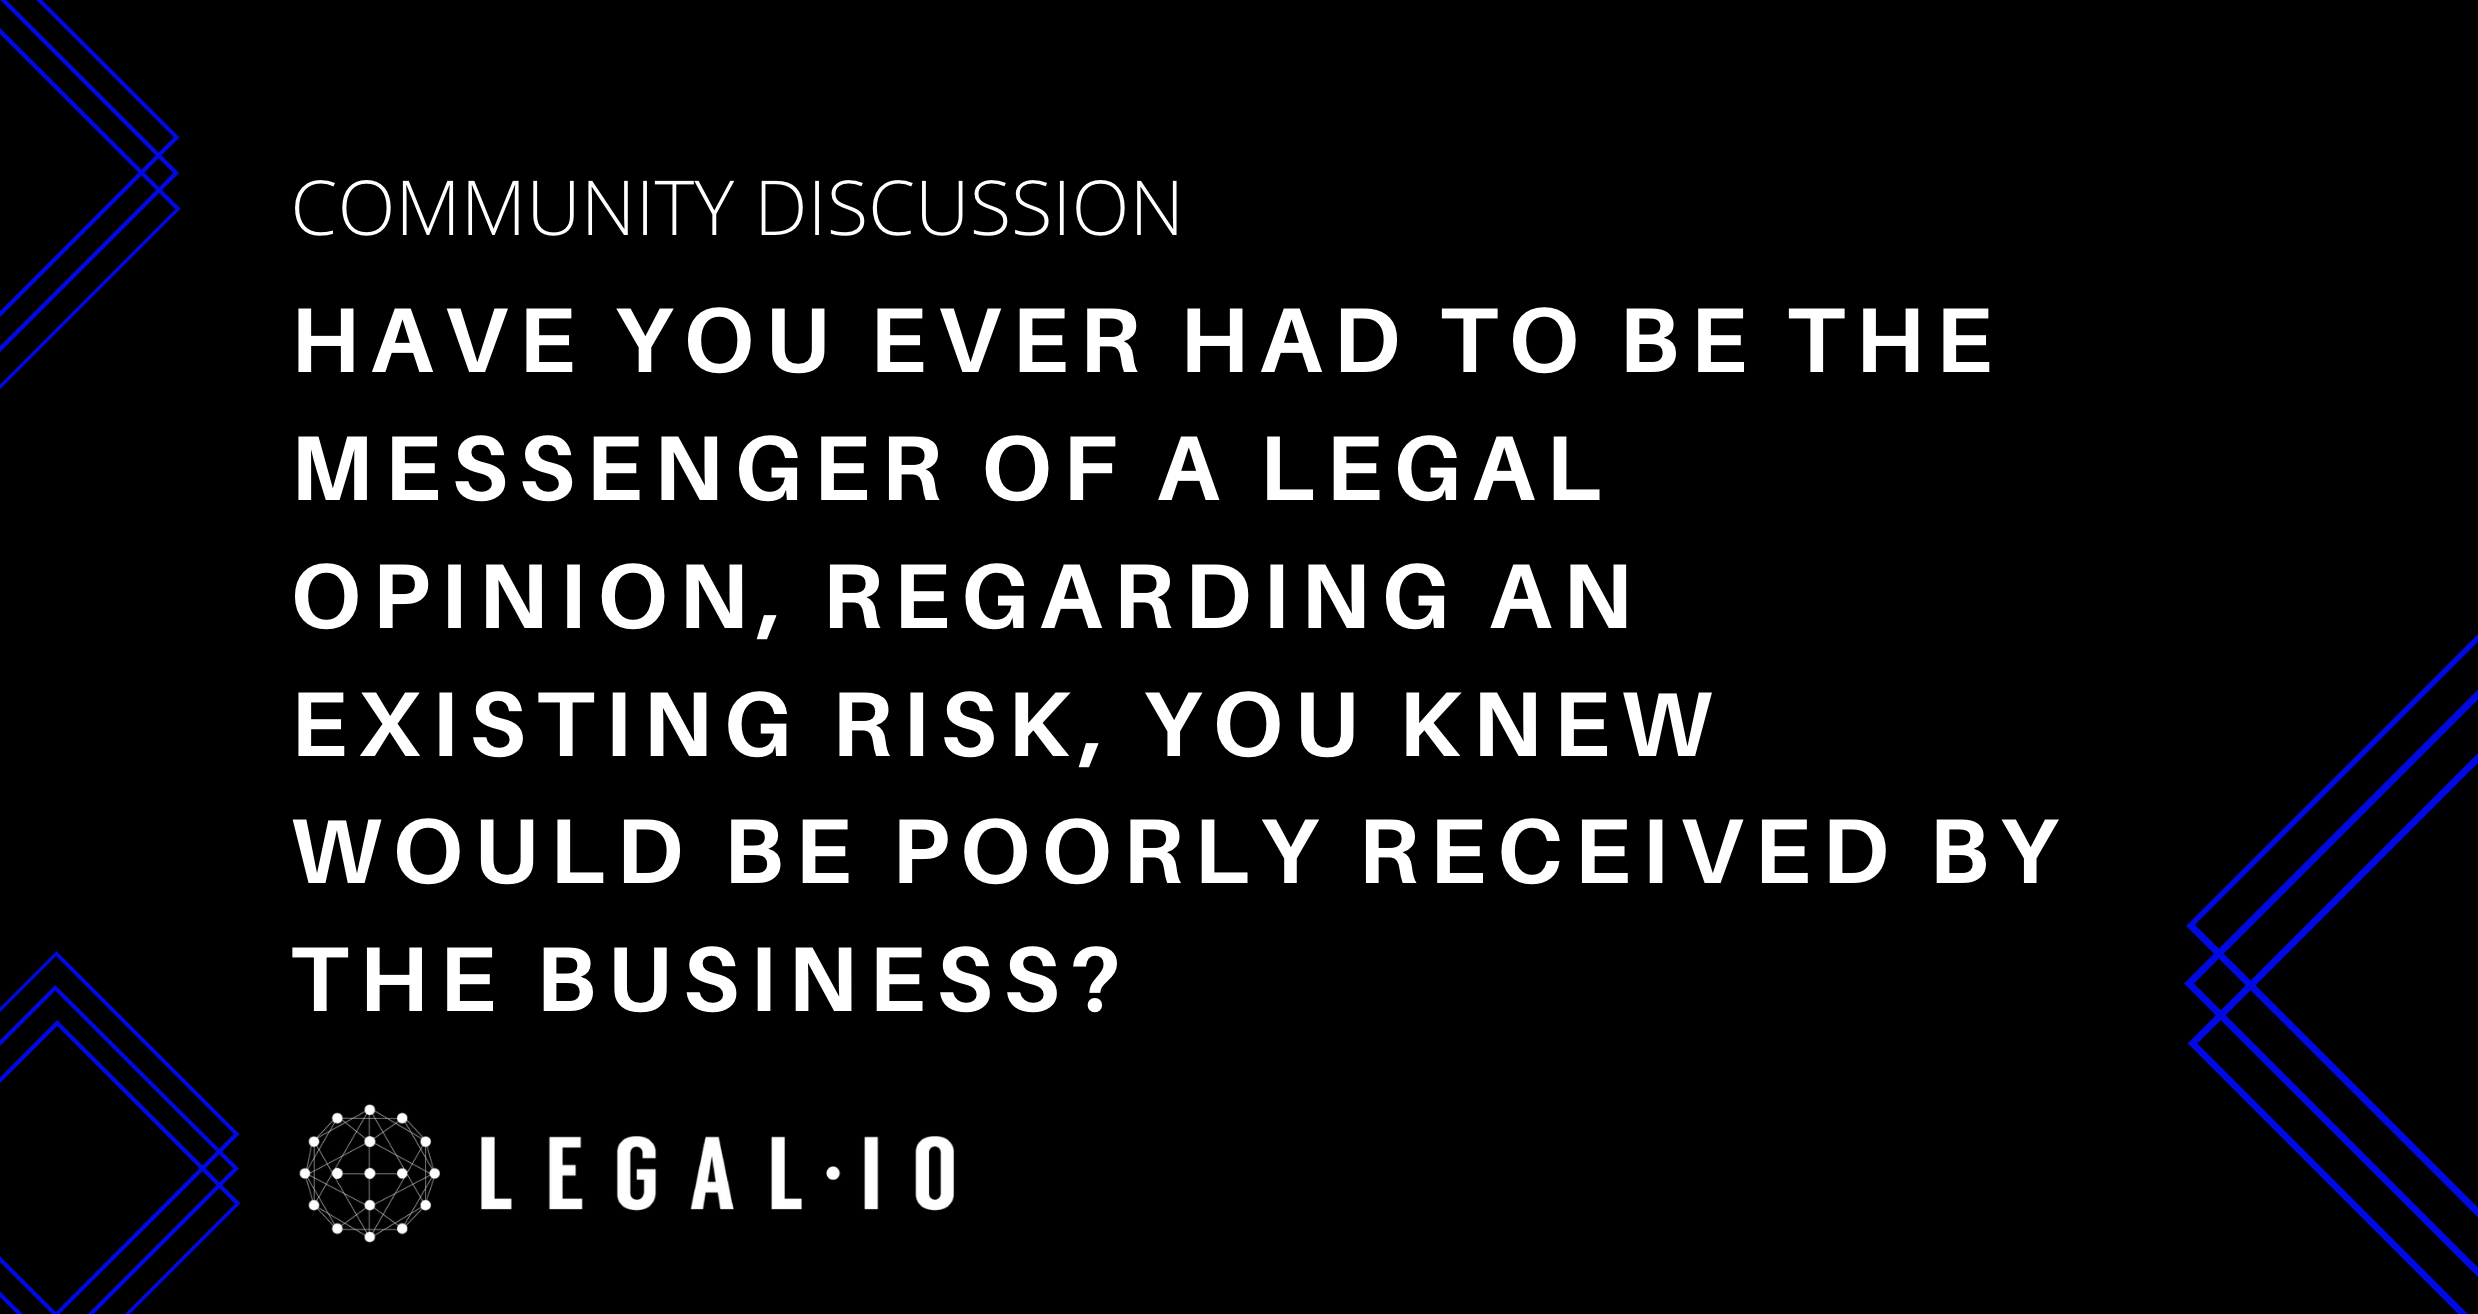 Community Perspectives: Have you ever had to be the messenger of a legal opinion, regarding an existing risk, you knew would be poorly received by the business?